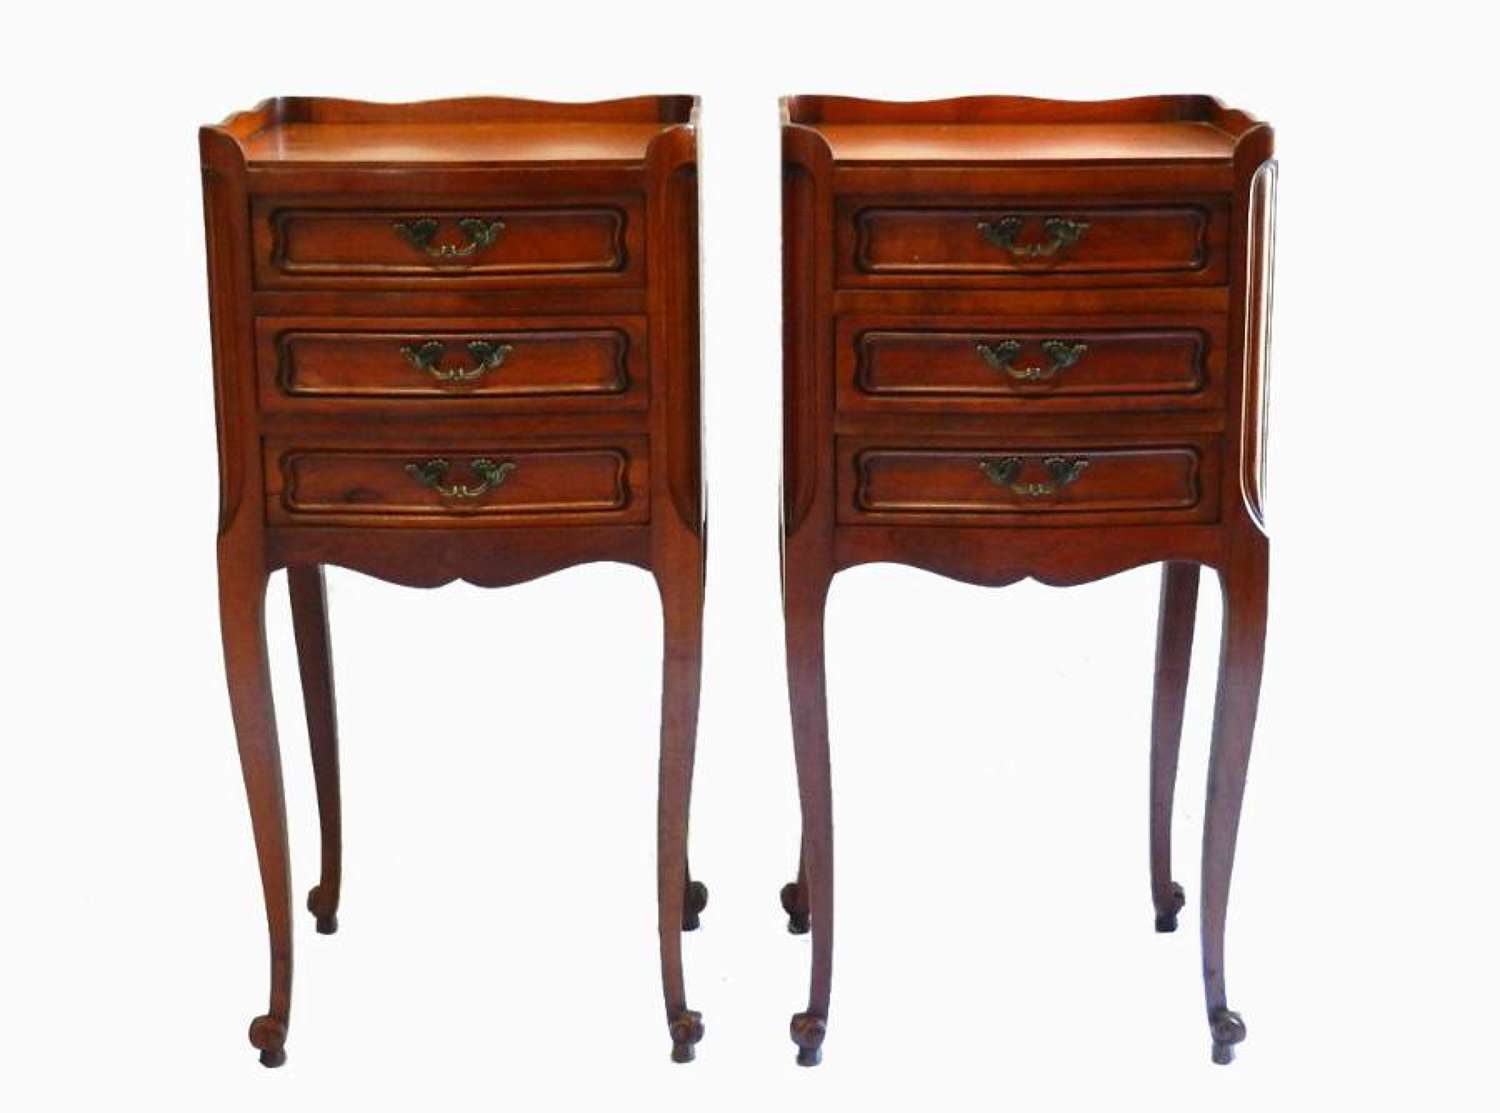 Pair of French Louis revival Cherry Bedside Tables Cabinet Nightstands